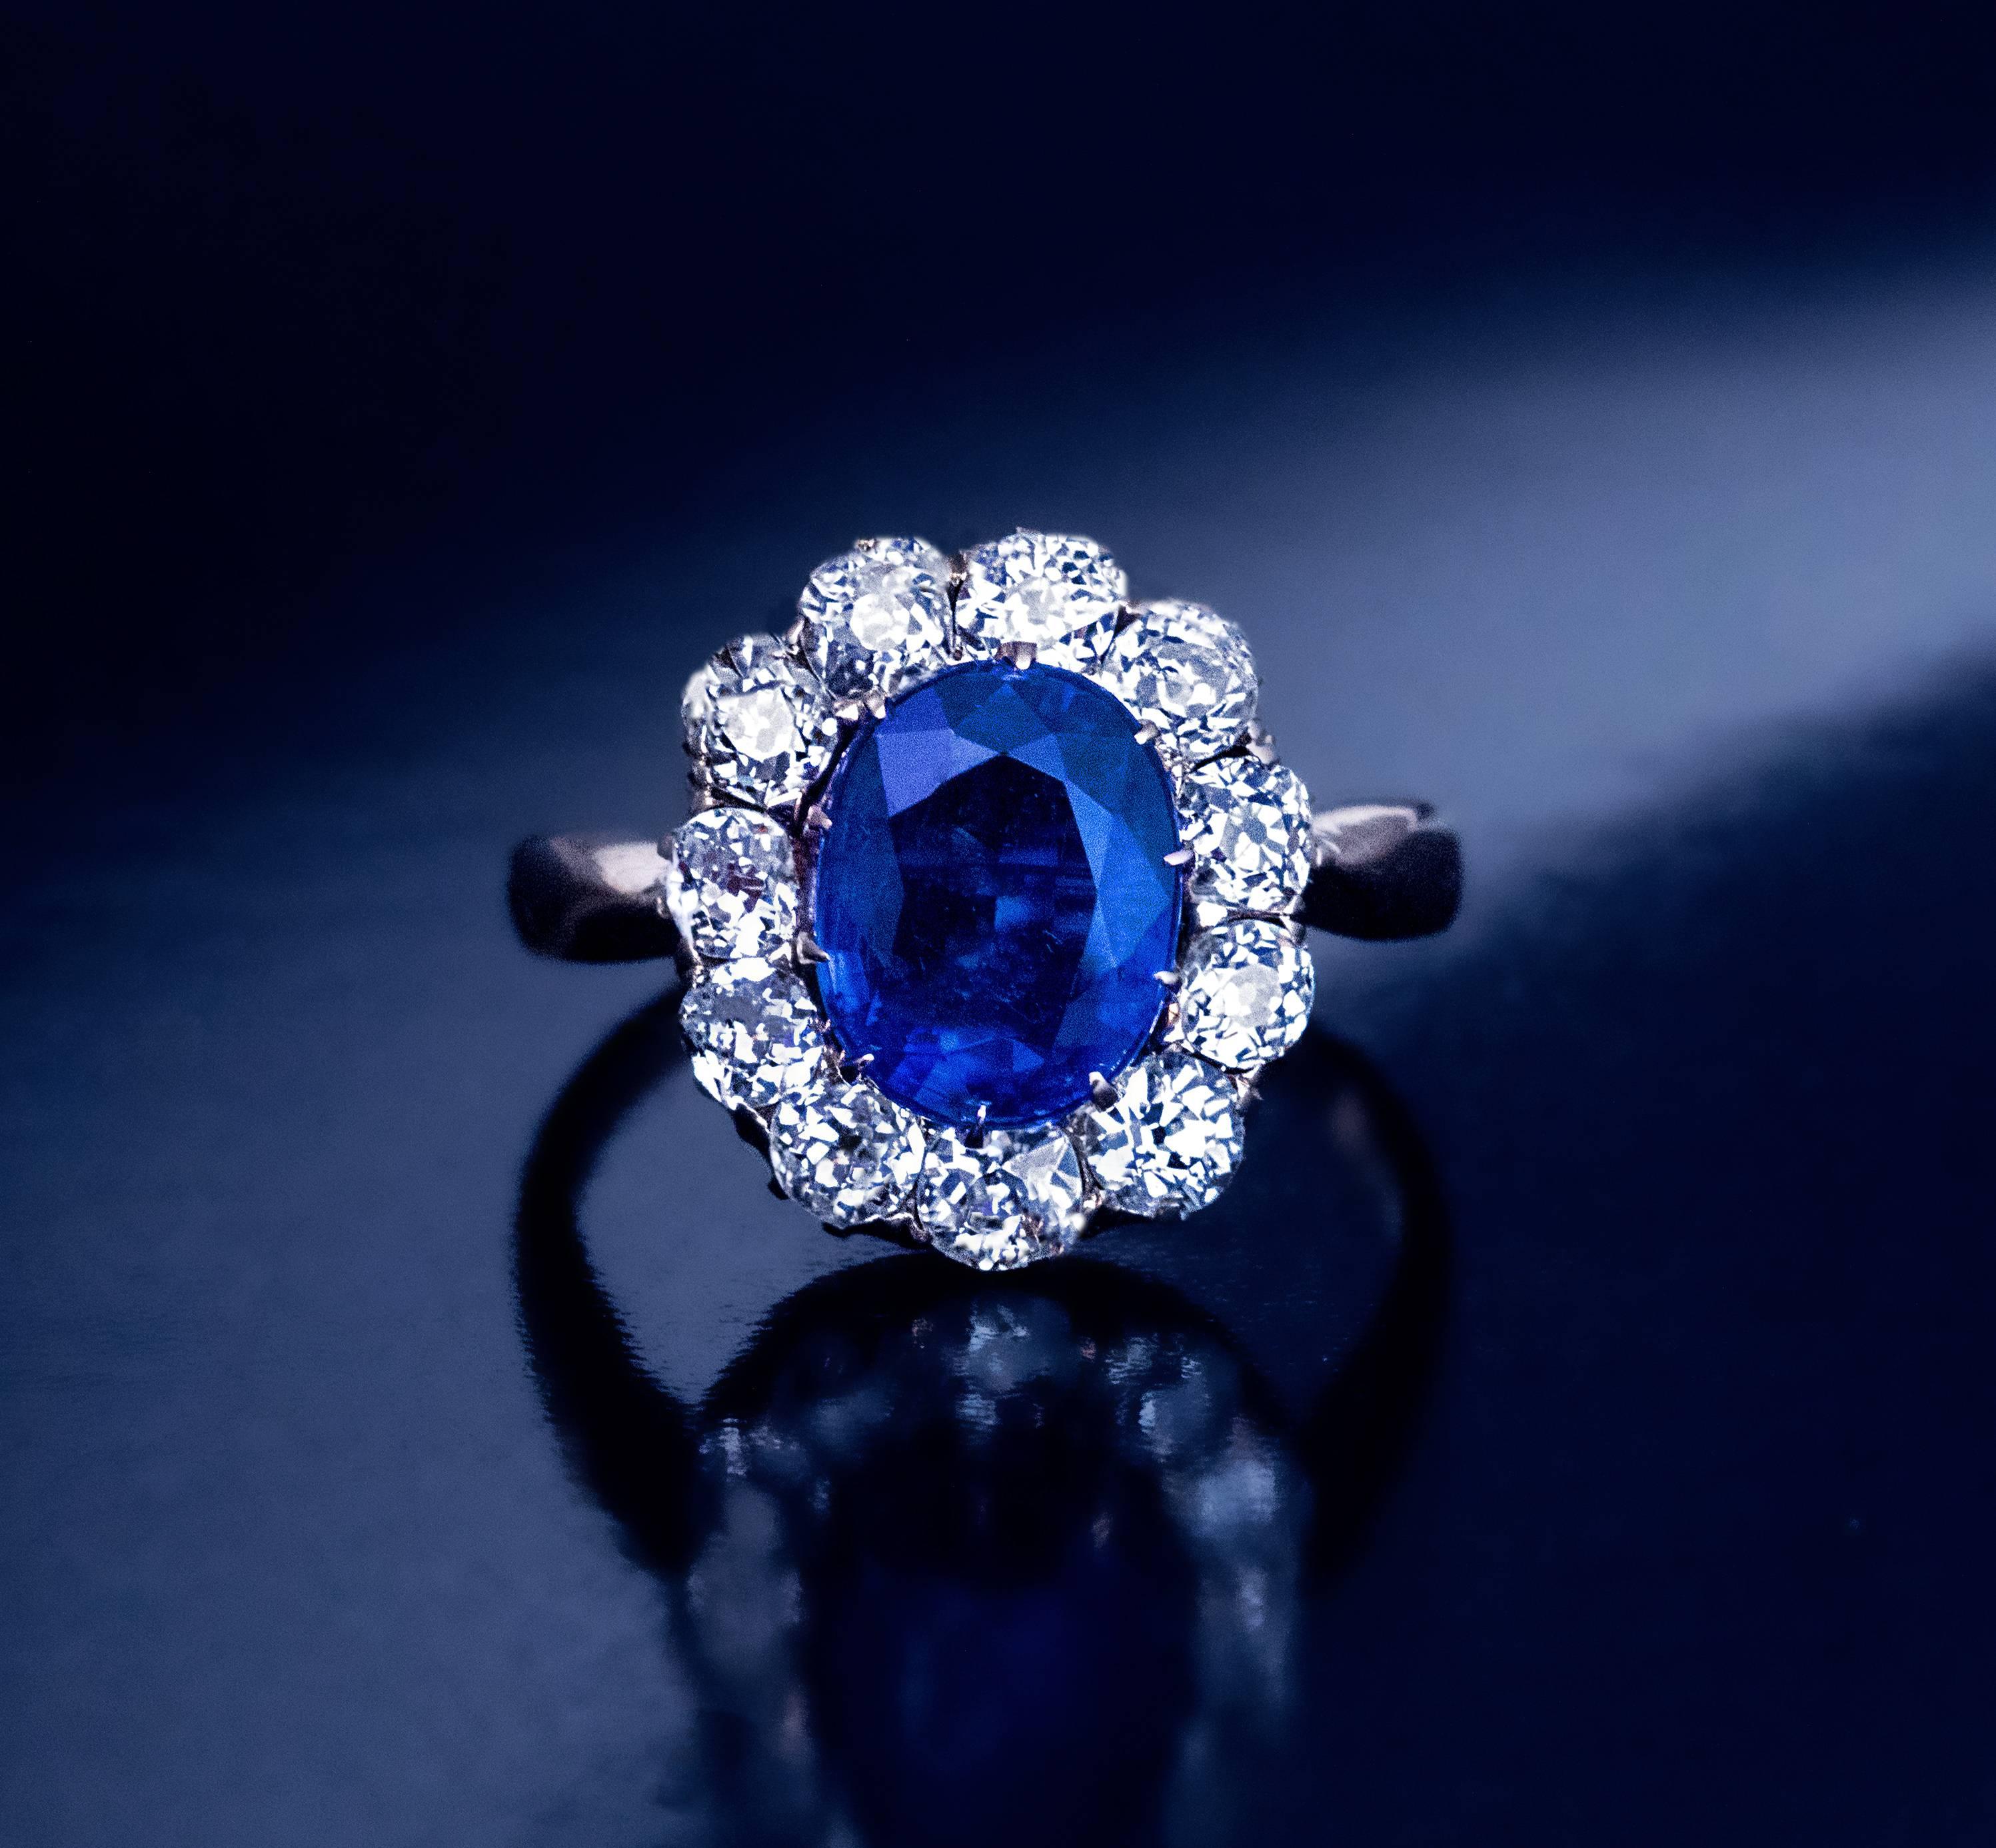 Circa 1910

A 14K gold ring is centered with a cornflower blue kyanite (measuring 9.5 x 7.5 x 4.5 mm, approximately 2.47 ct.) surrounded by 11 sparkling bright white old mine cut diamonds (H-I color, mostly VS clarity).

Estimated total diamond